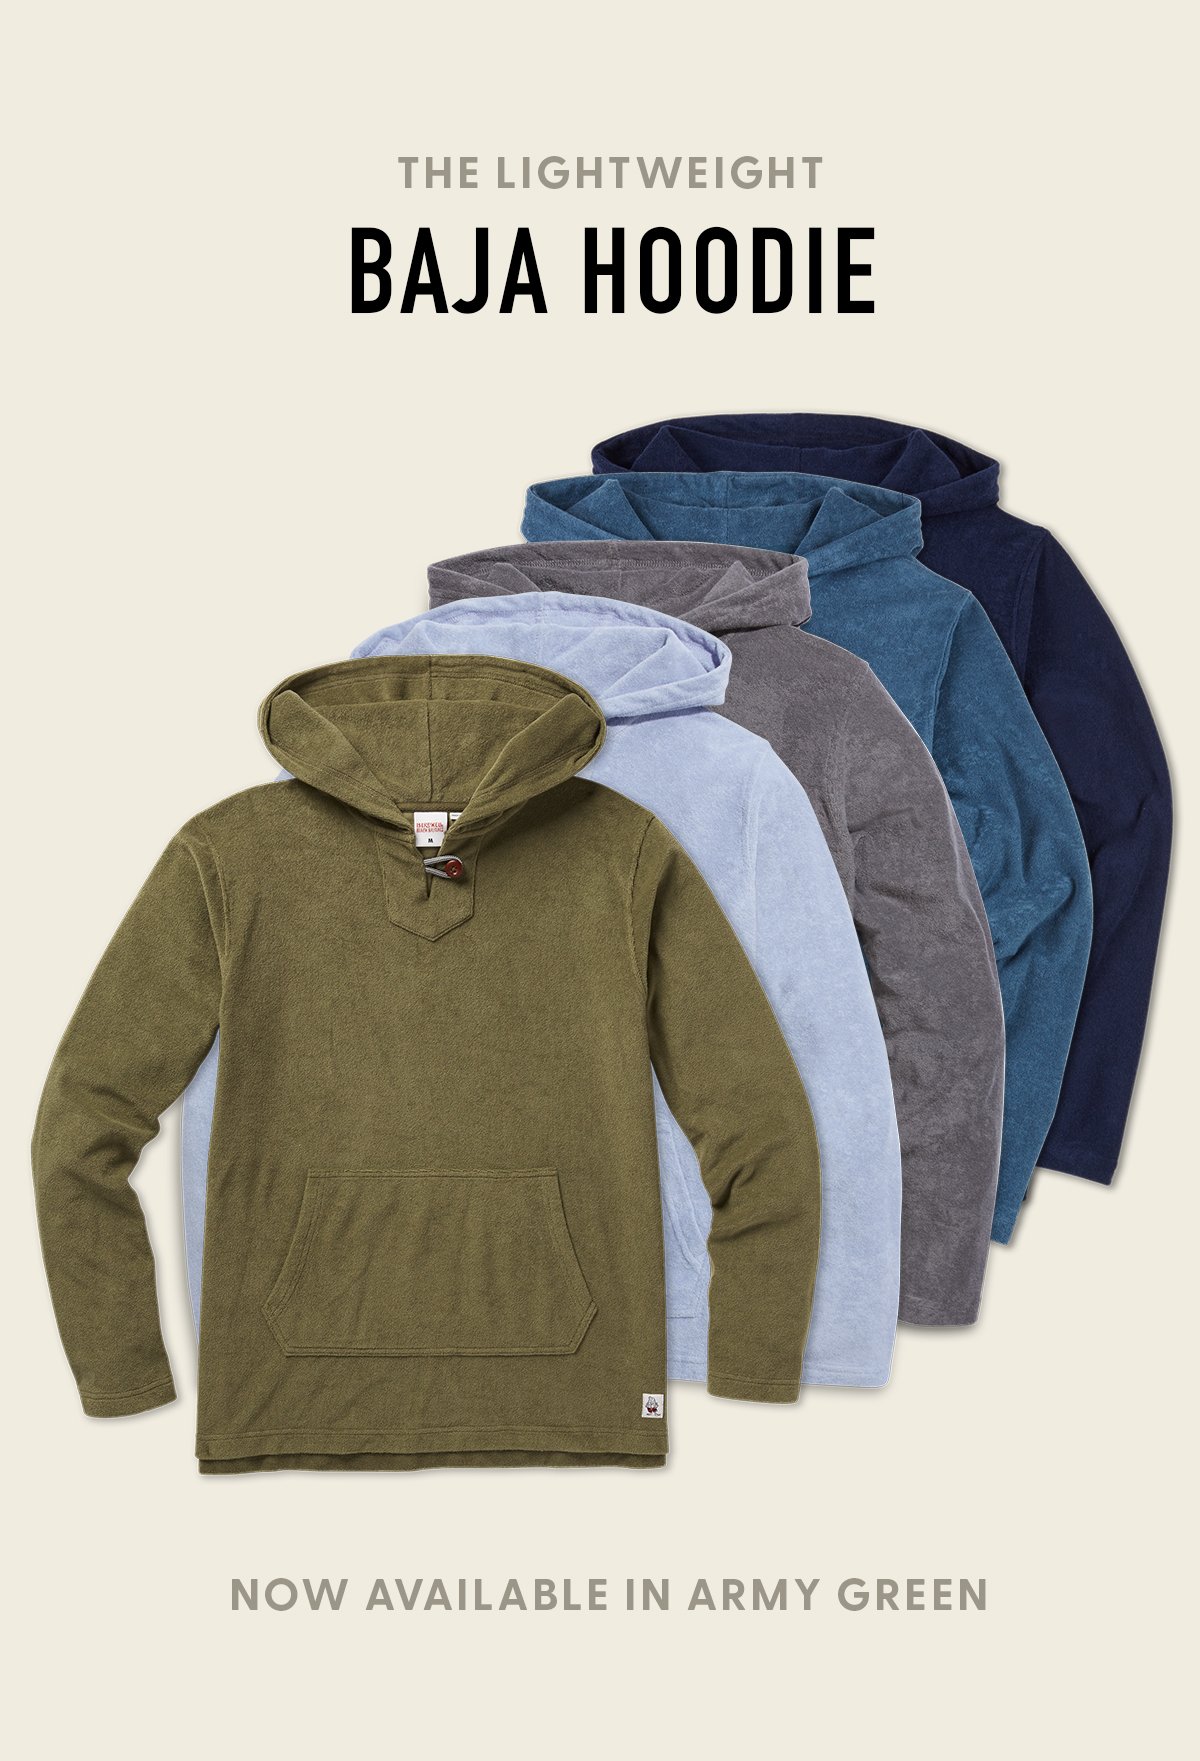 The Lightweight Baja Hoodie - Now Available in Army Green